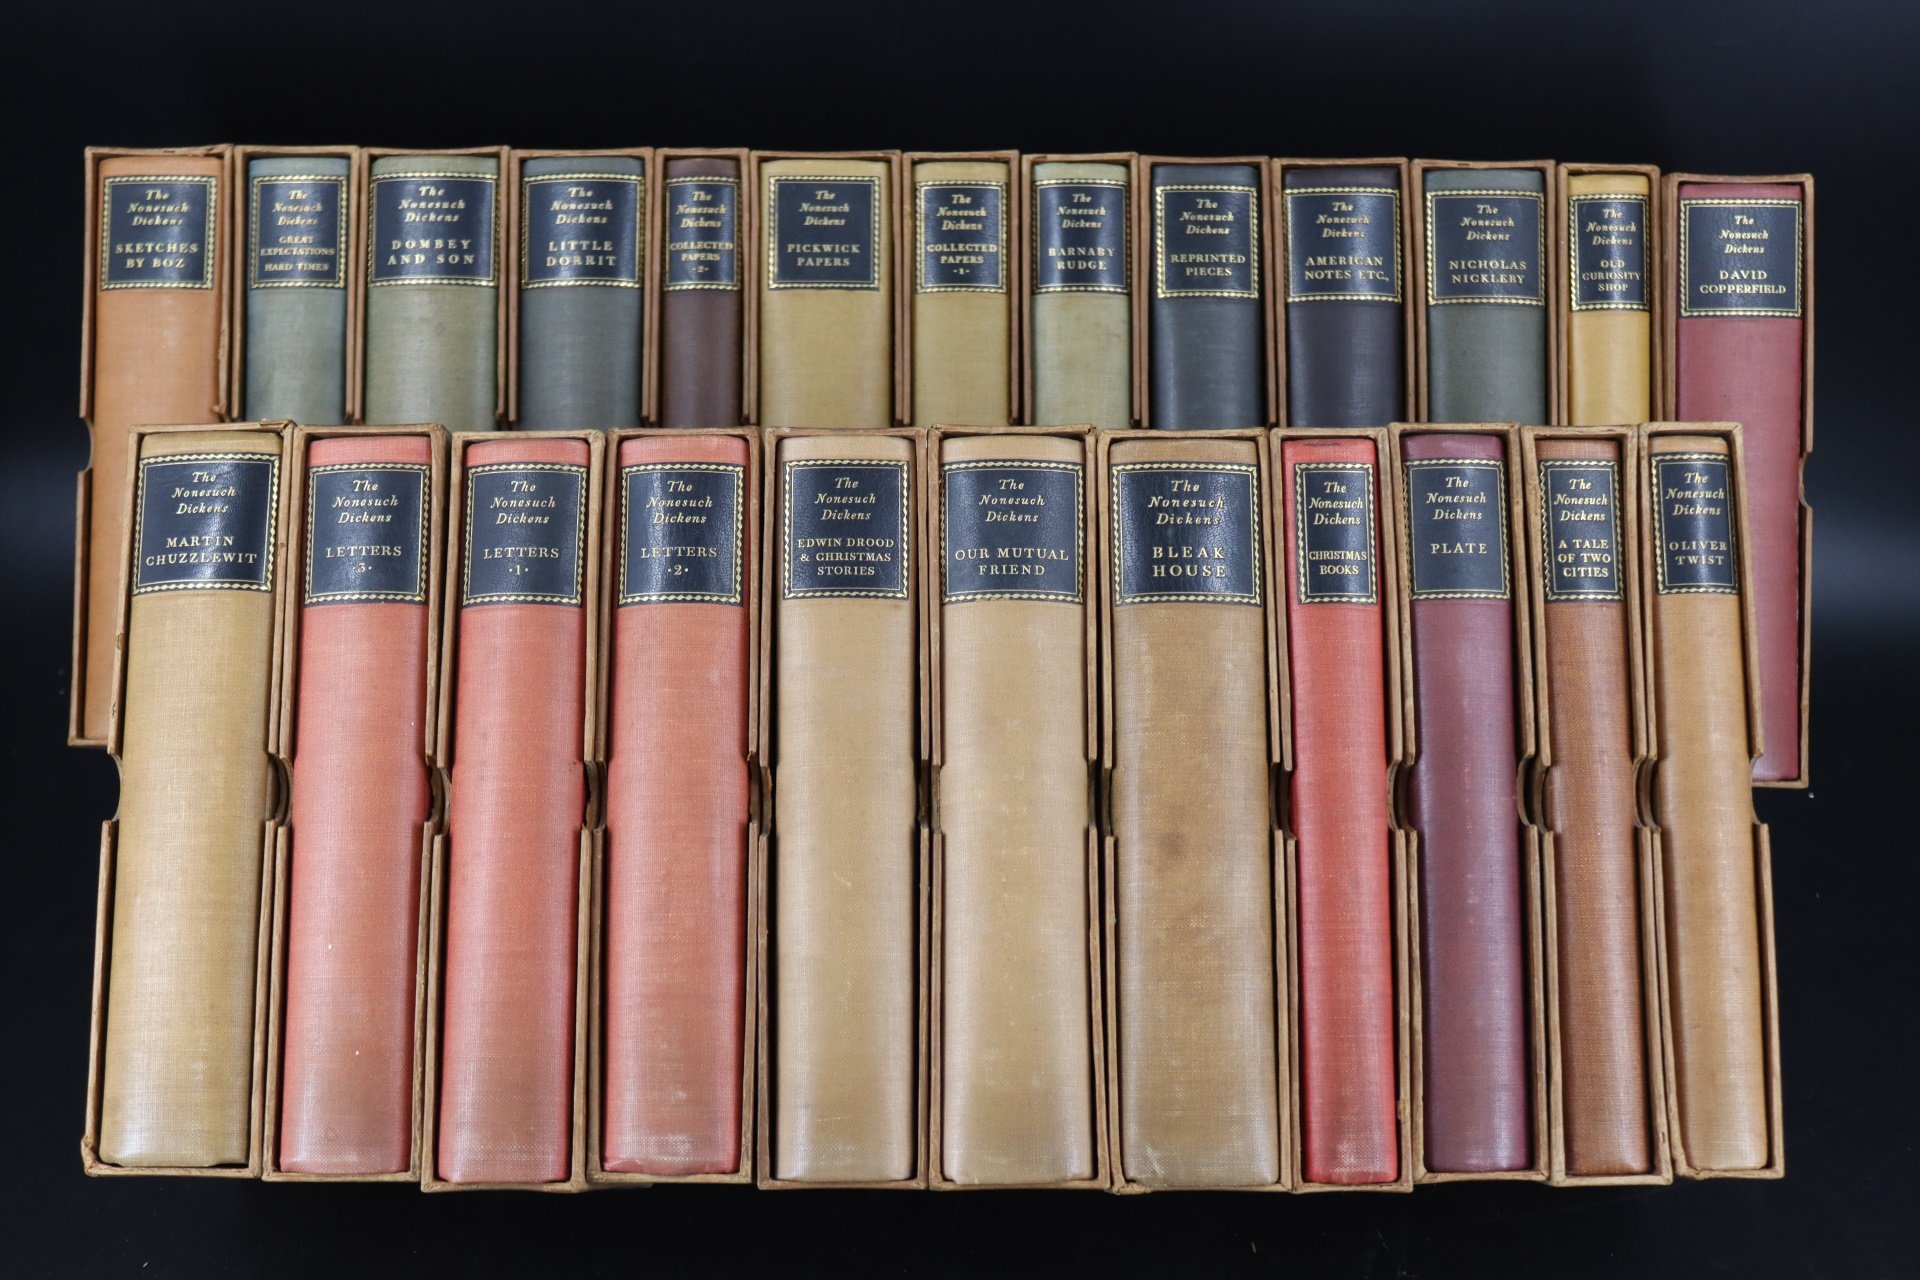  THE NONESUCH DICKENS COLLECTED 3b7681